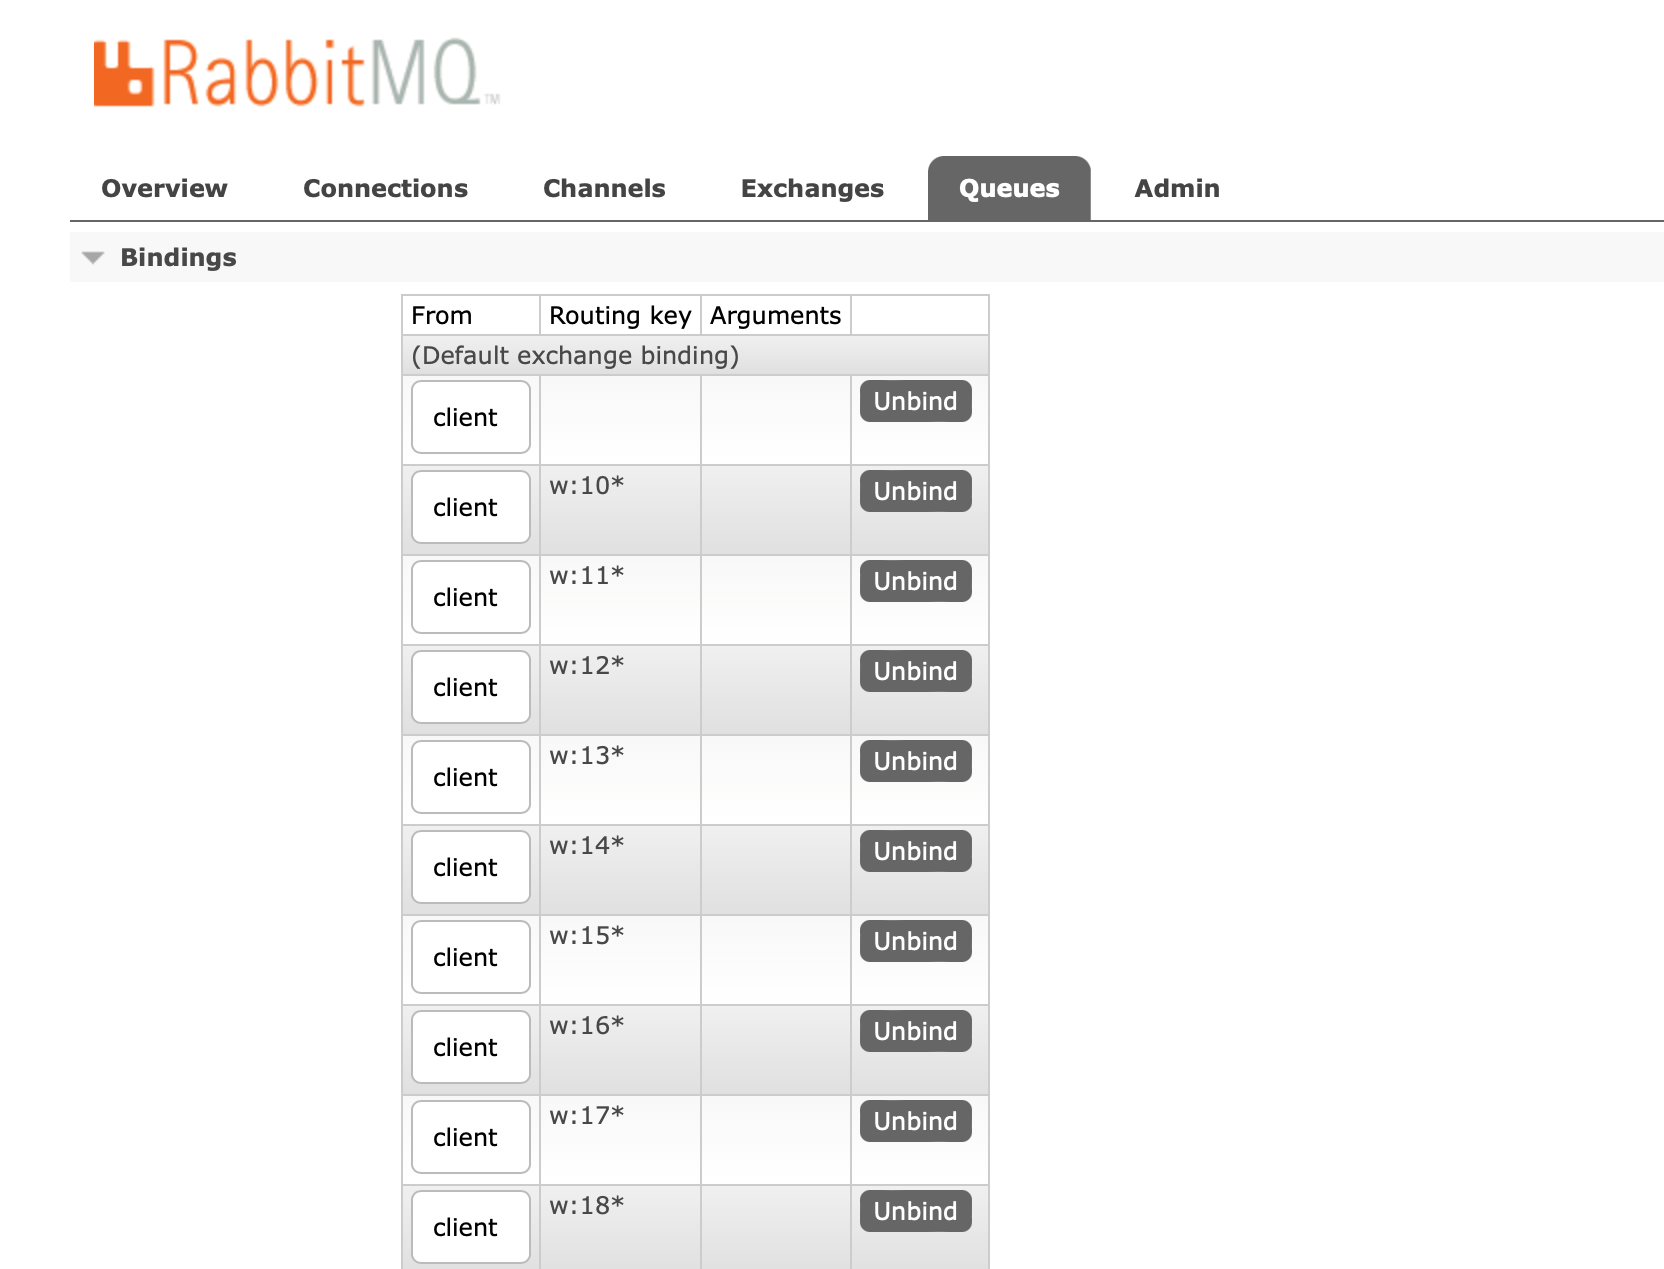 Horizontal Scaling of Socket.IO Microservices with RabbitMQ